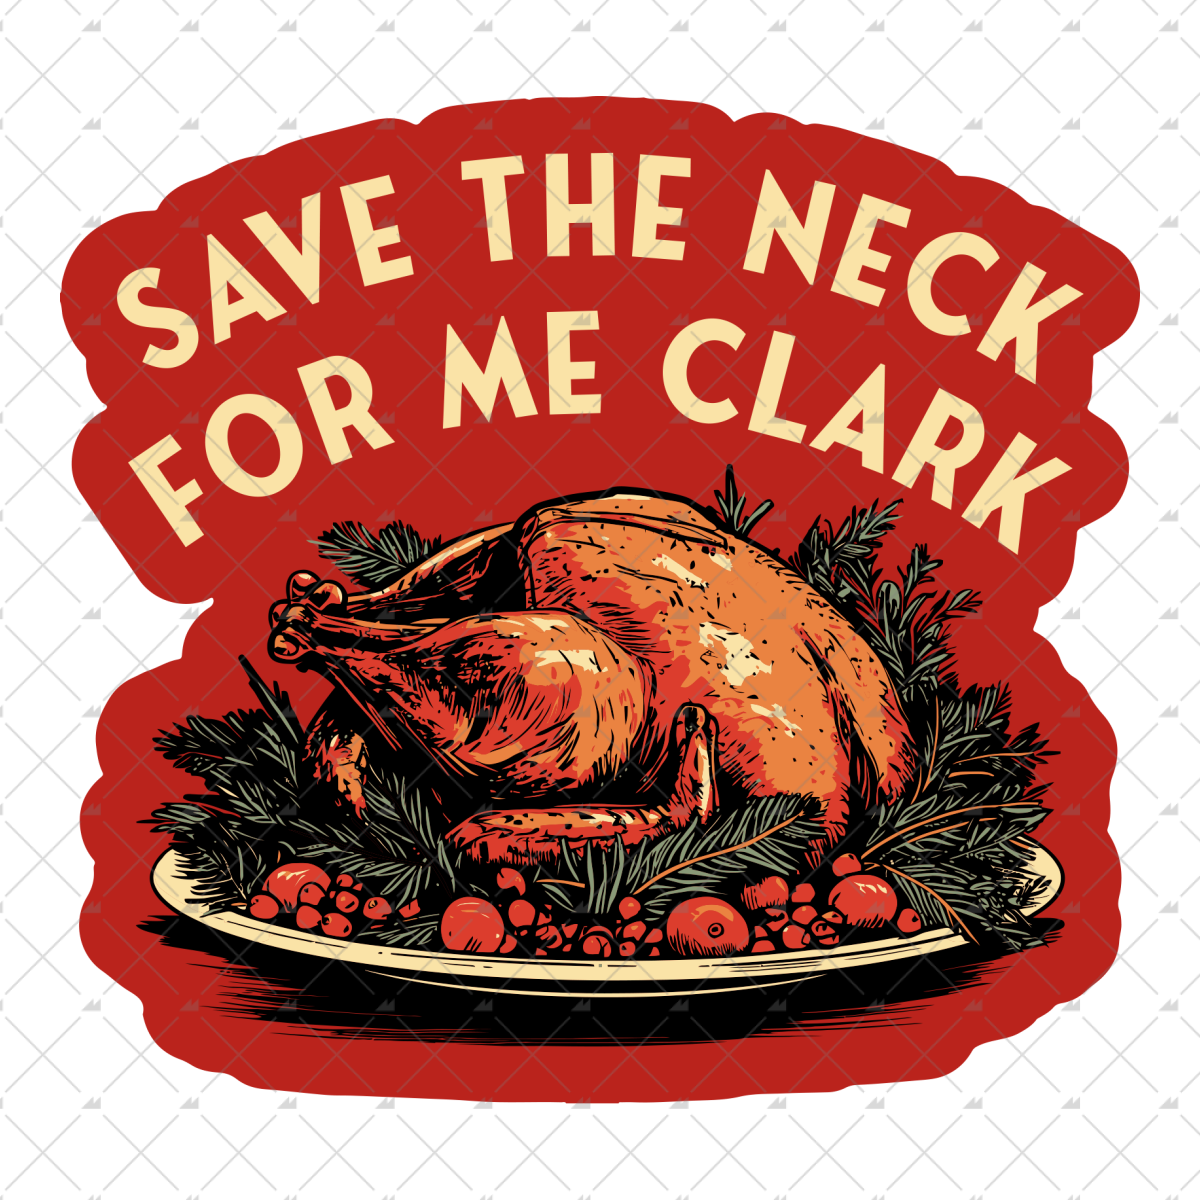 Save The Neck For Me Clark - Sticker